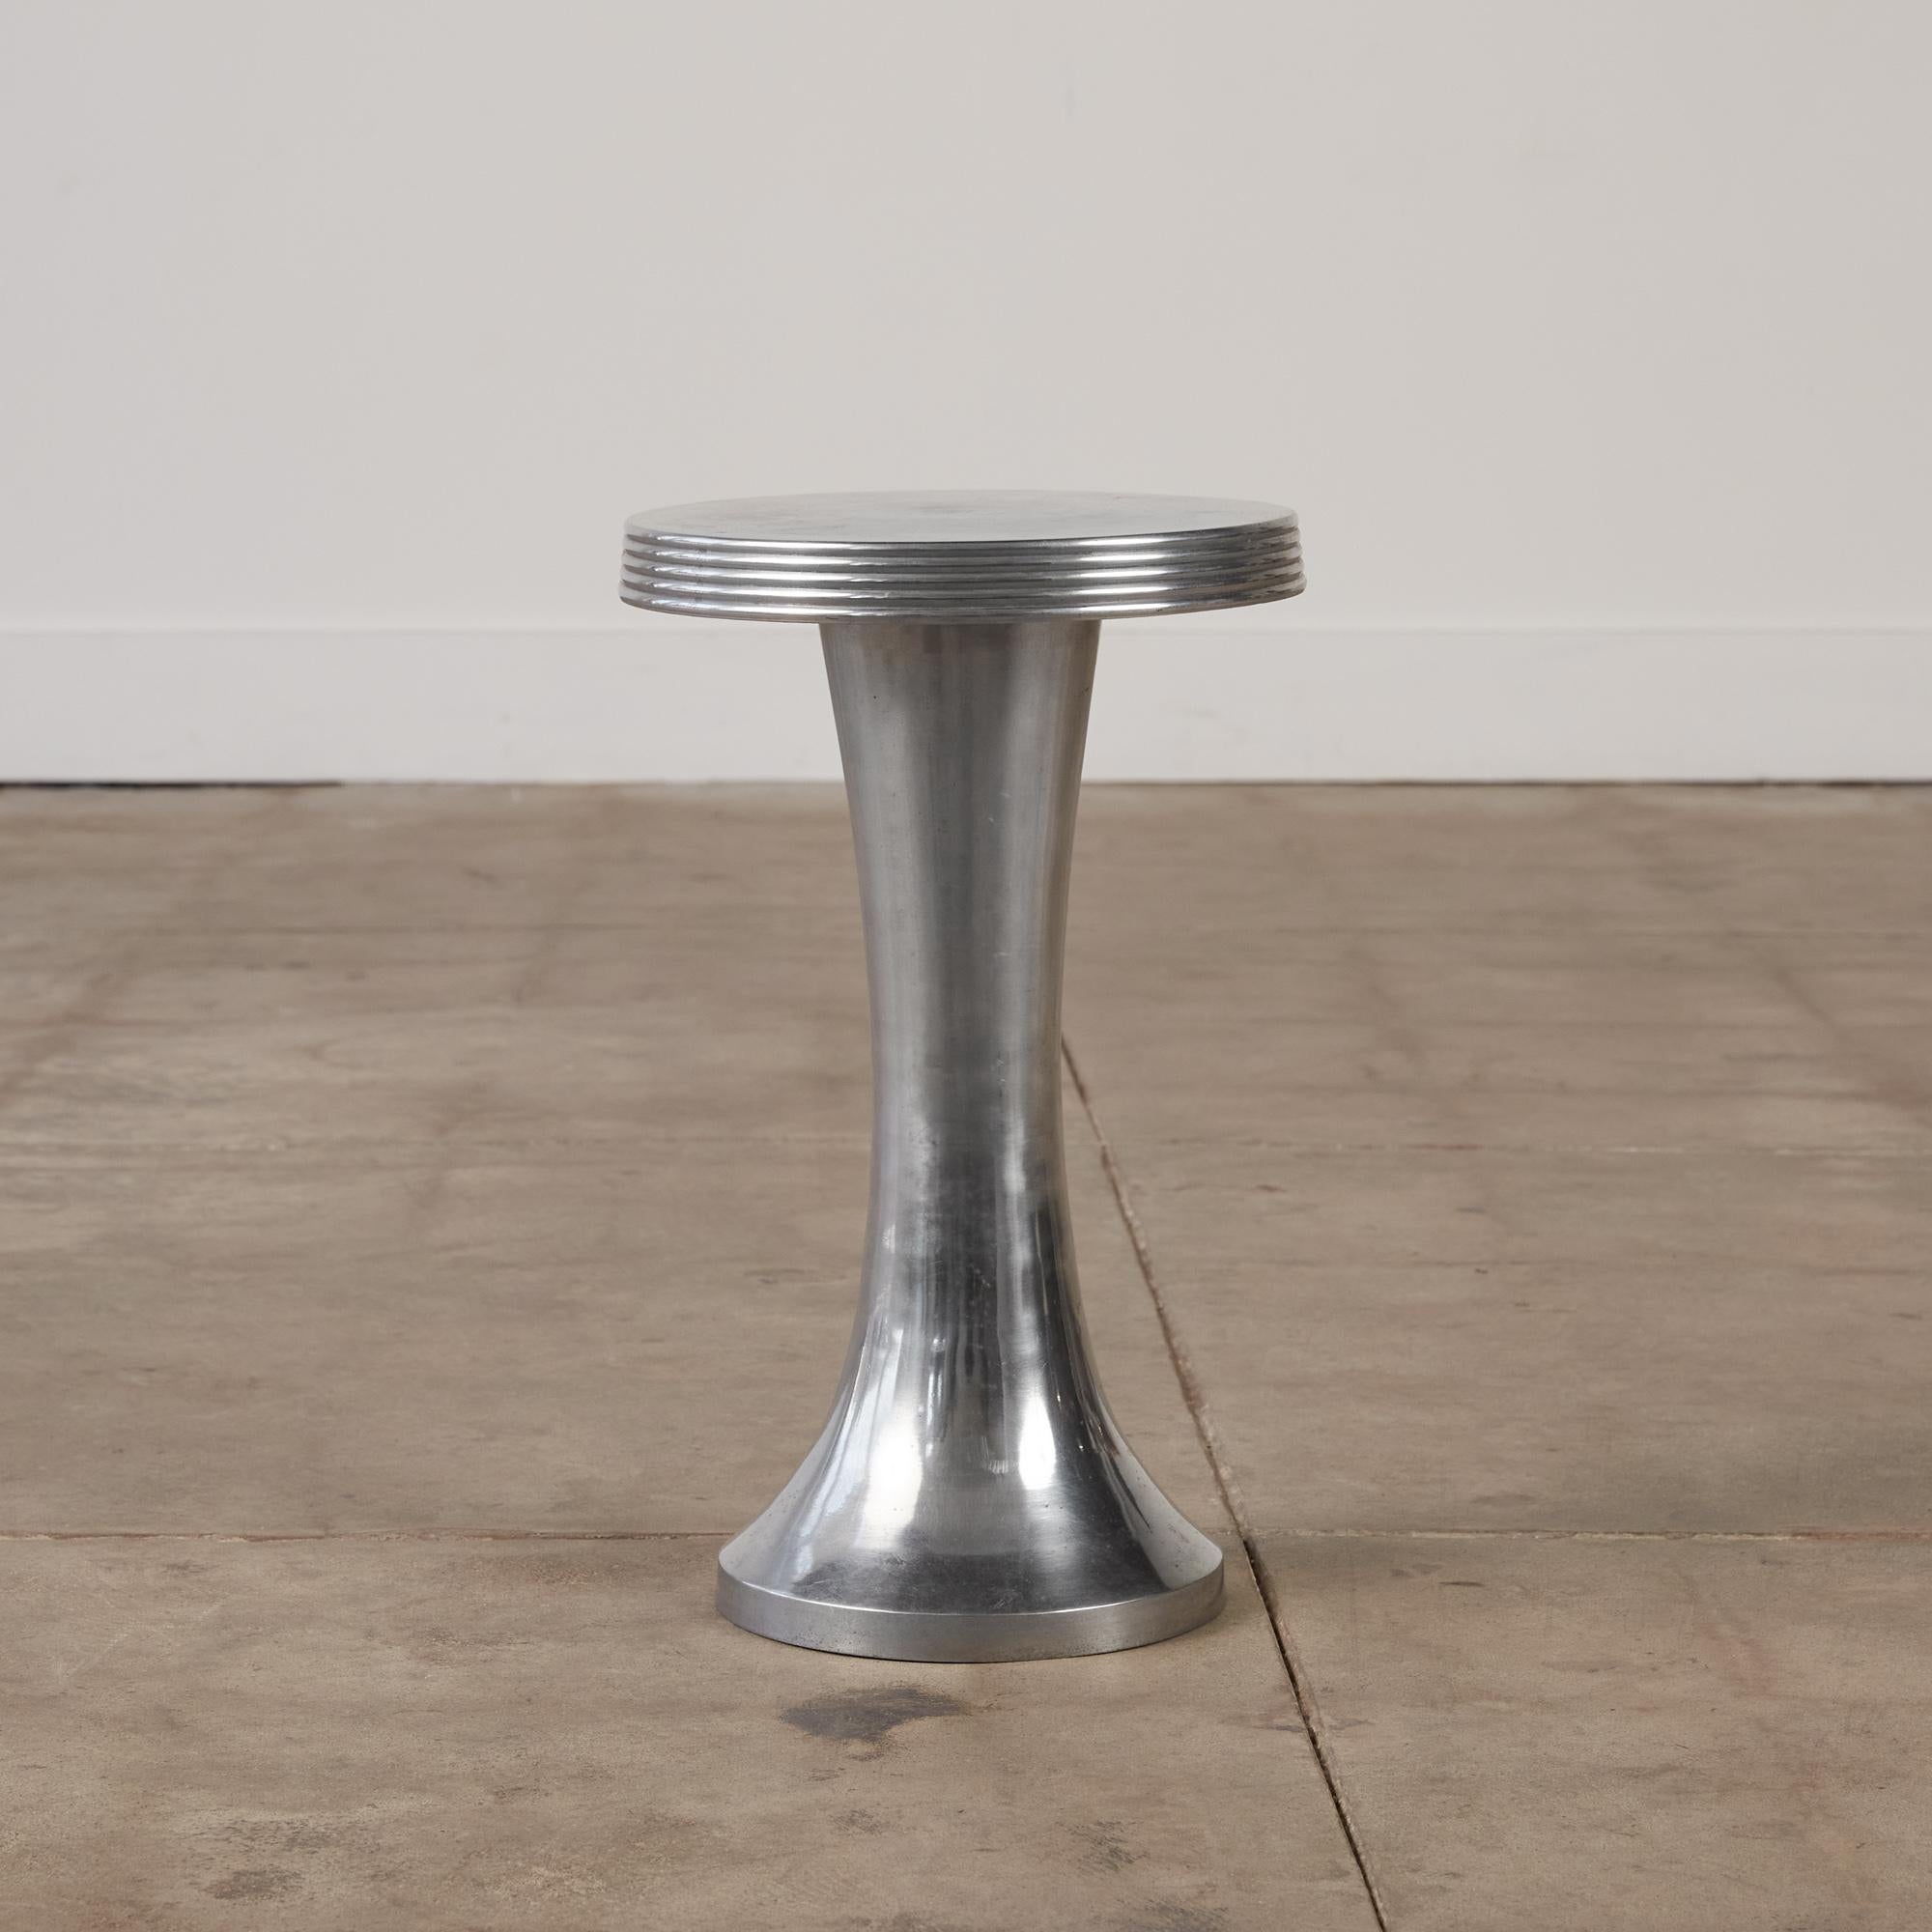 Pedestal table made of cast aluminum with a flared base. The tabletop has a stacked fluted detail all around, a characteristic commonly seen in designs in the Art Deco and Postmodern era. A perfect piece to rest a cocktail or book.

Dimensions: